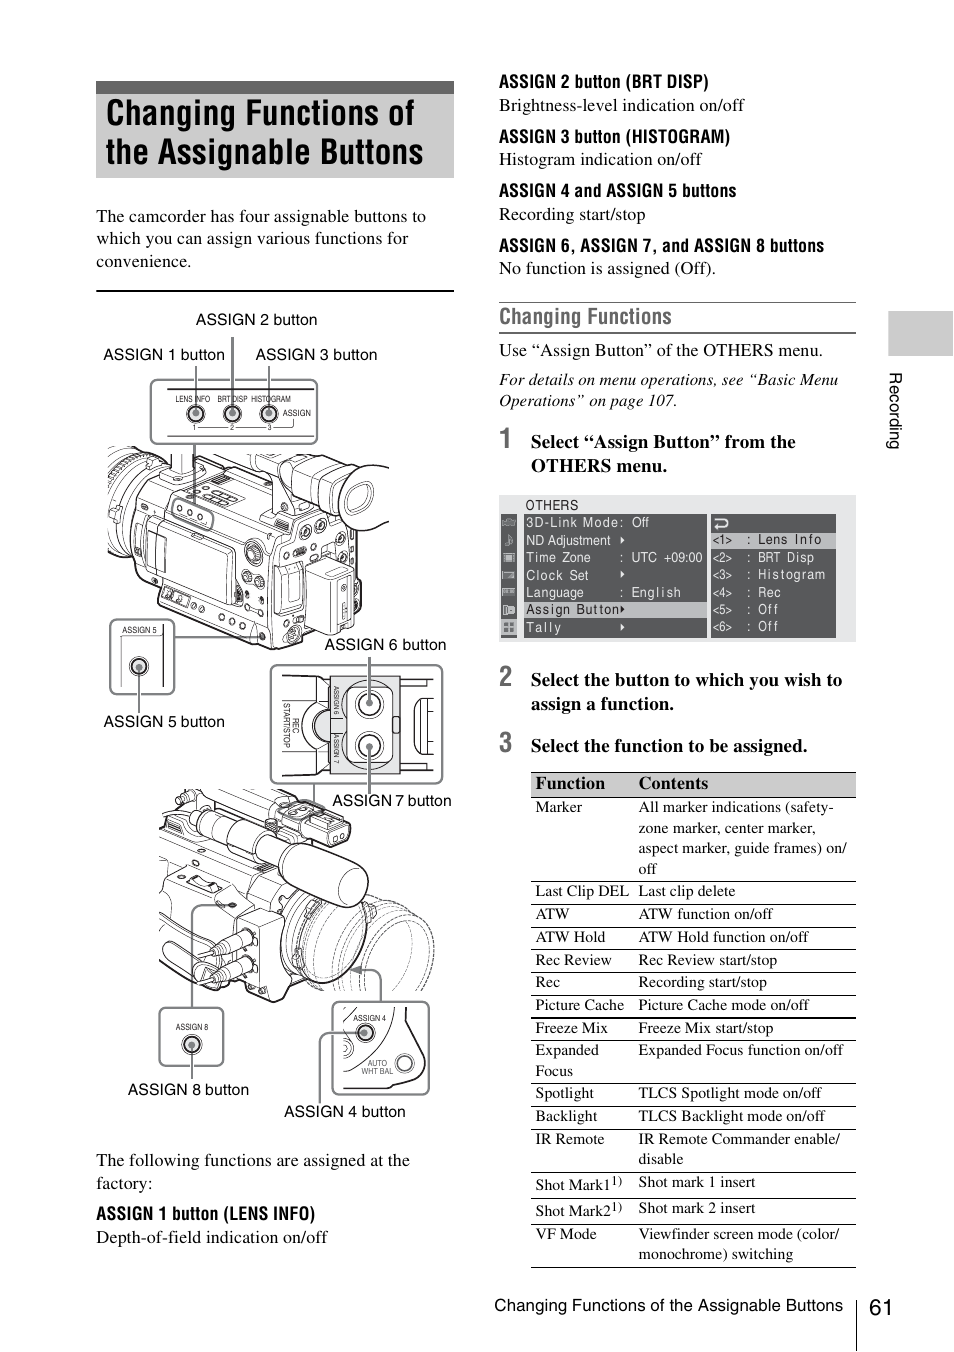 Changing functions of the assignable buttons, Changing functions, Select “assign button” from the others menu | Select the function to be assigned, Use “assign button” of the others menu, Function contents | Sony PMW-F3K User Manual | Page 61 / 164